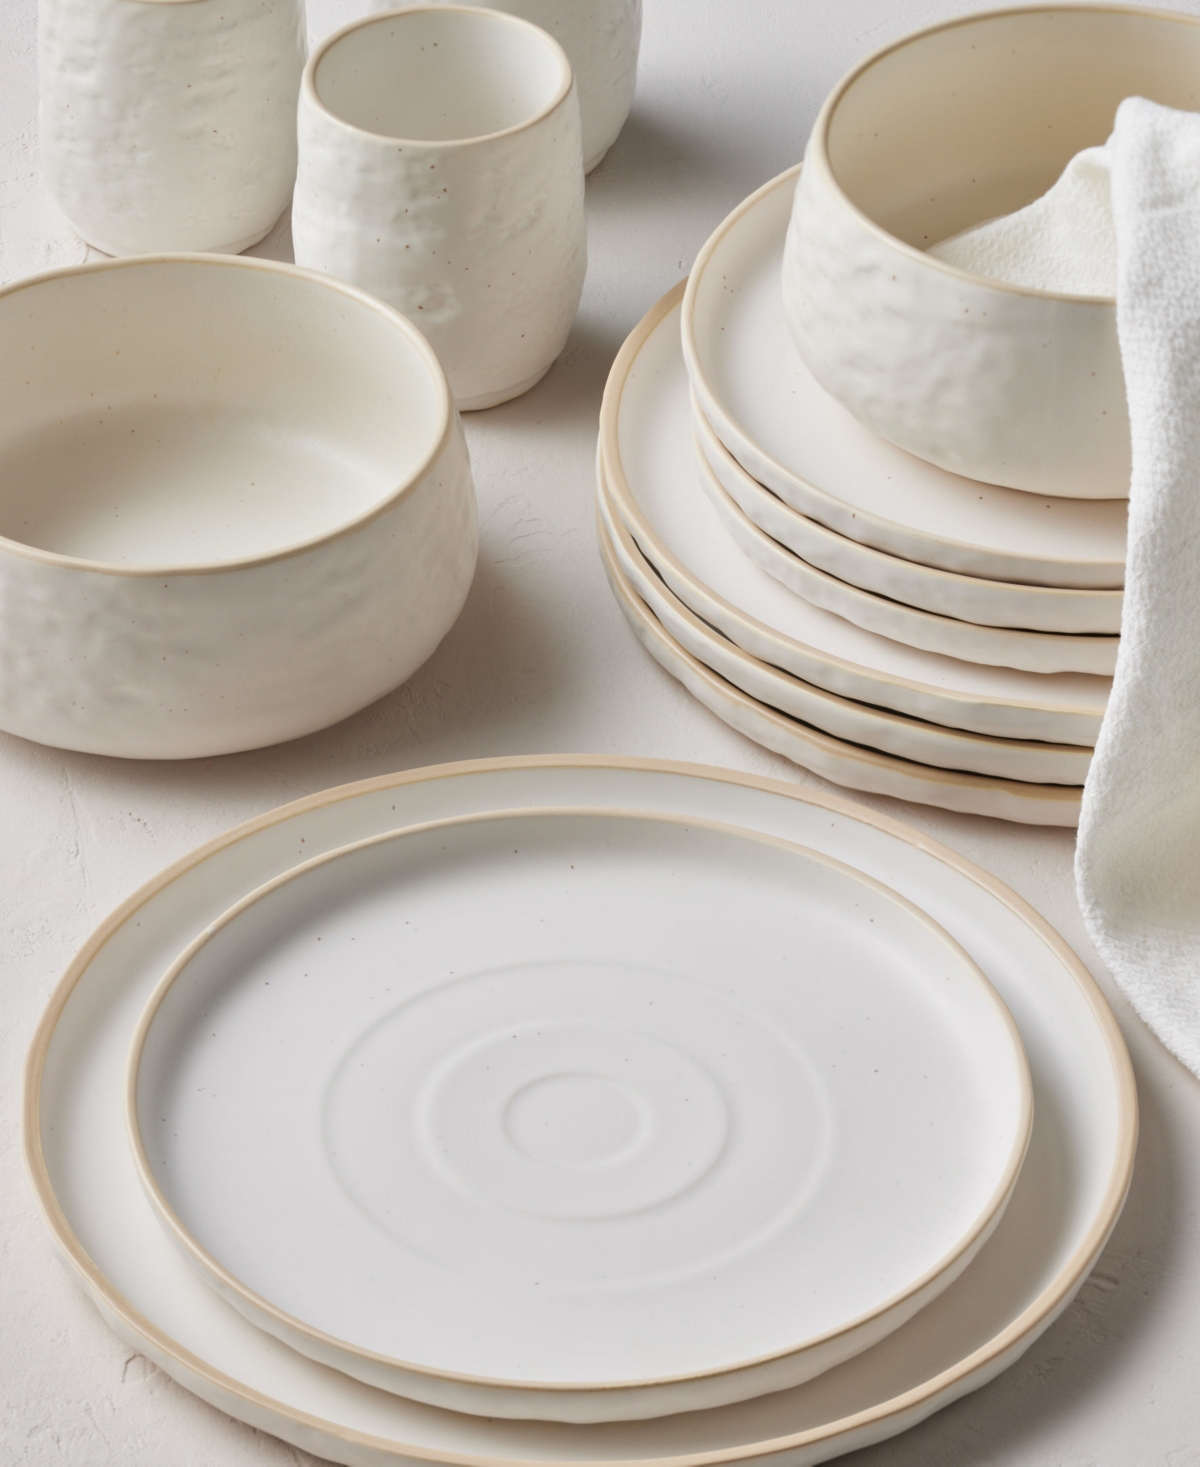 Shosai Stoneware 16 Pieces Dinnerware Set, Service for 4 - White Speckled